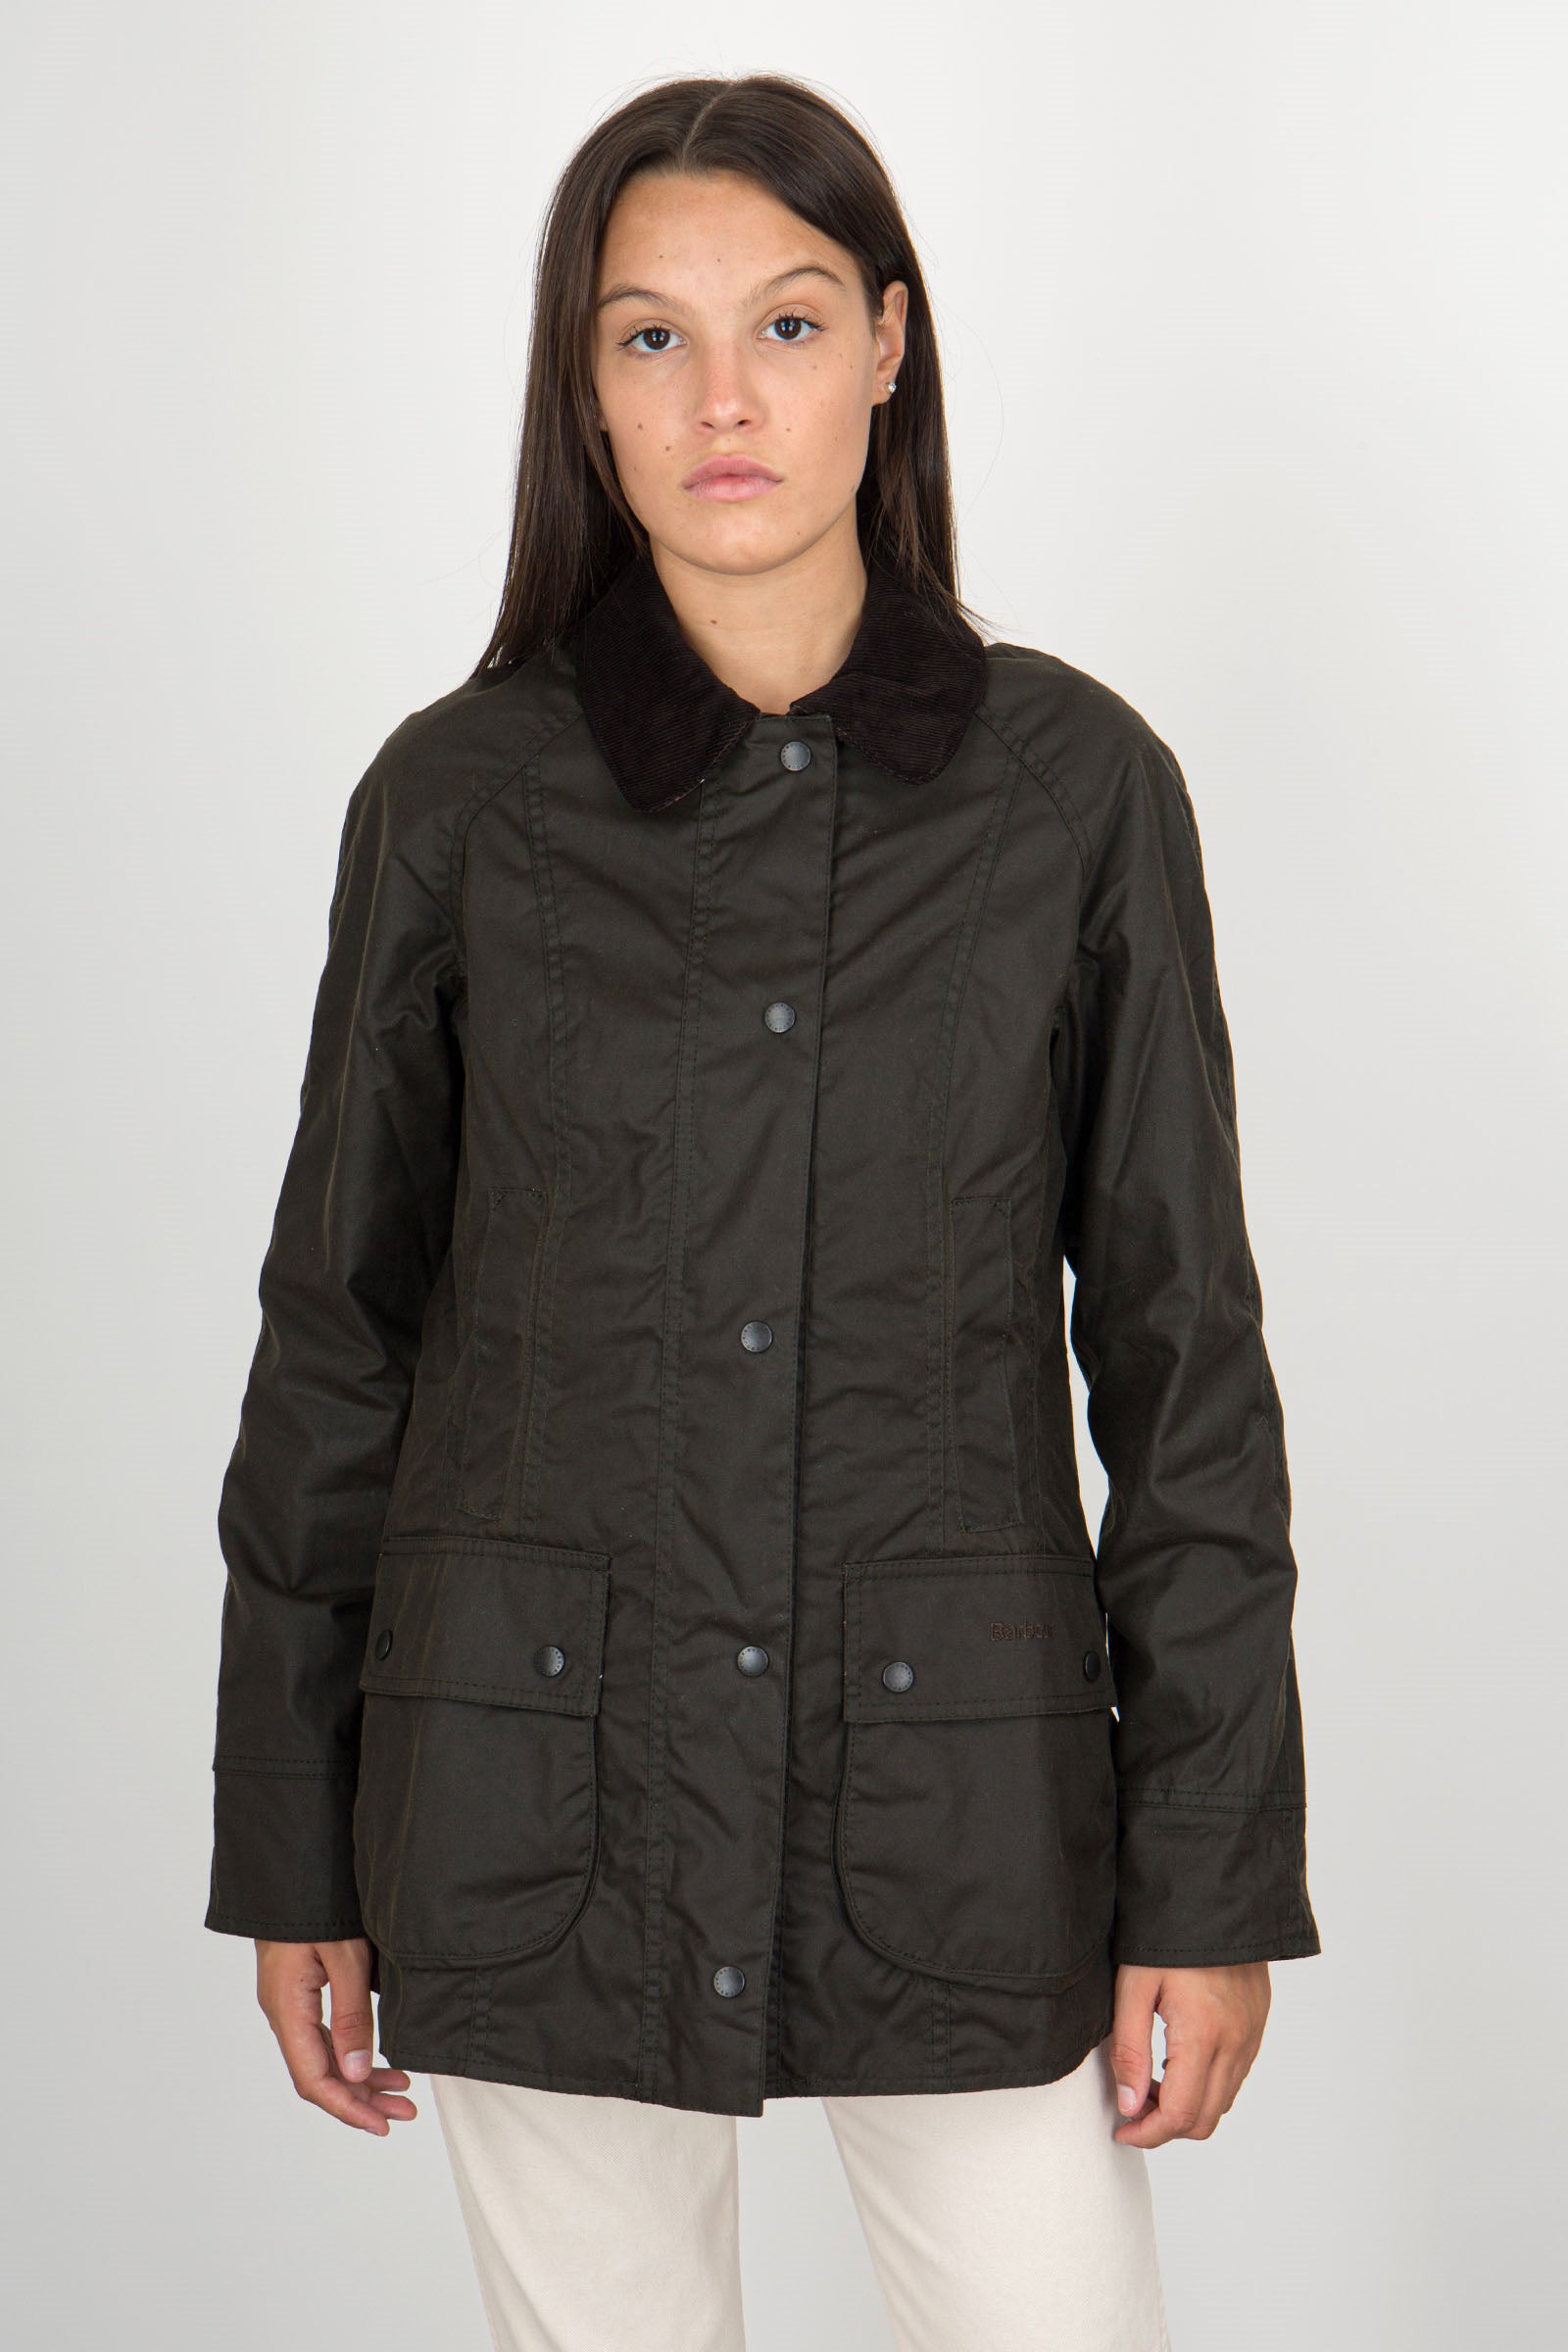 Barbour Giubbotto Beadnell Wax Olive Verde Oliva Donna - 1